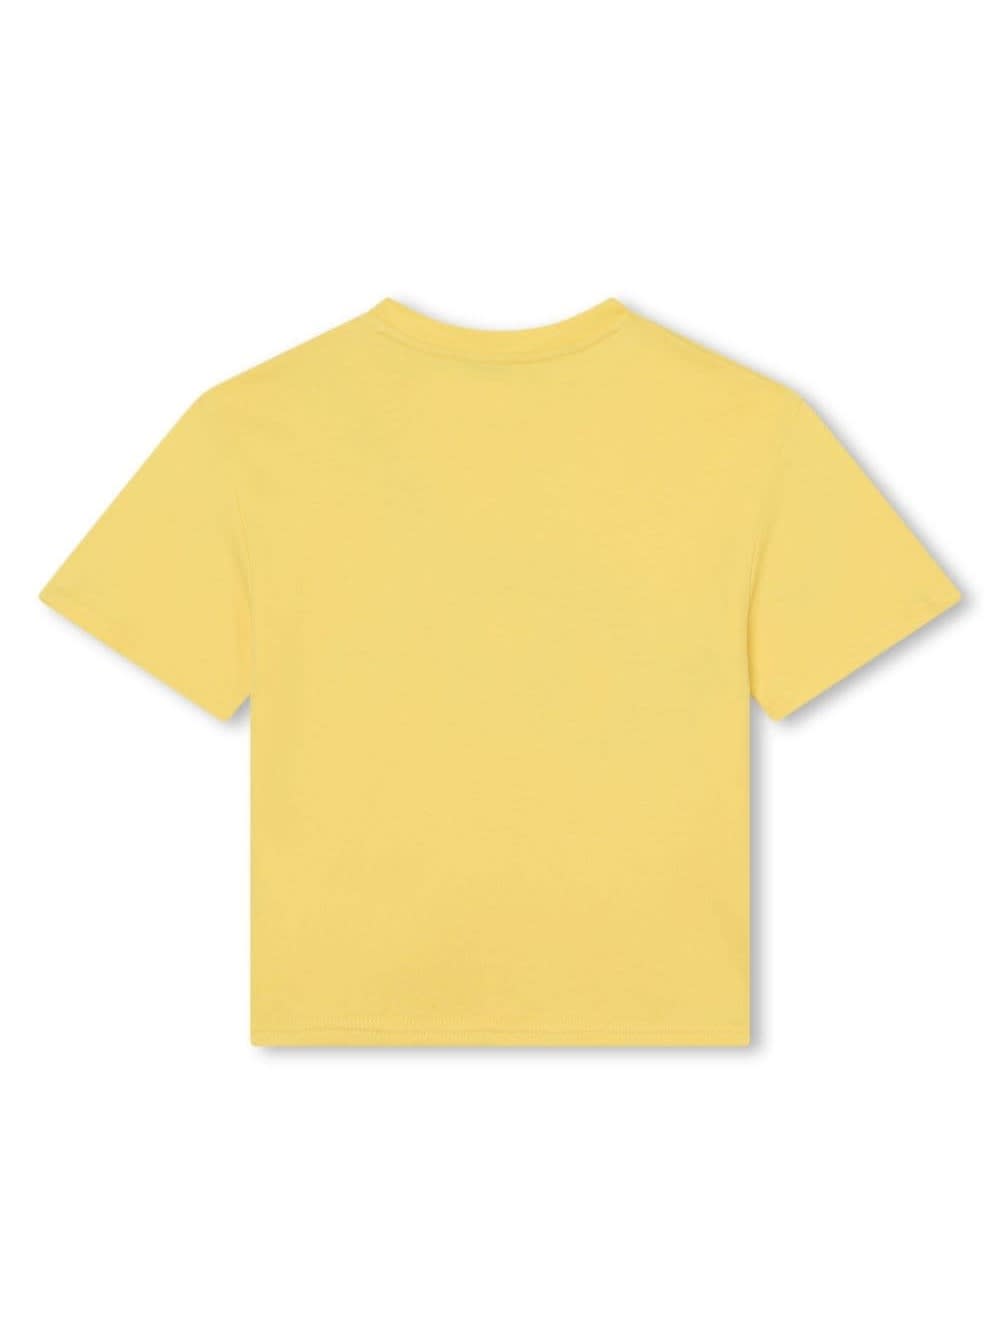 Shop Marc Jacobs Yellow T-shirt With Bag Print At The Front In Cotton Girl